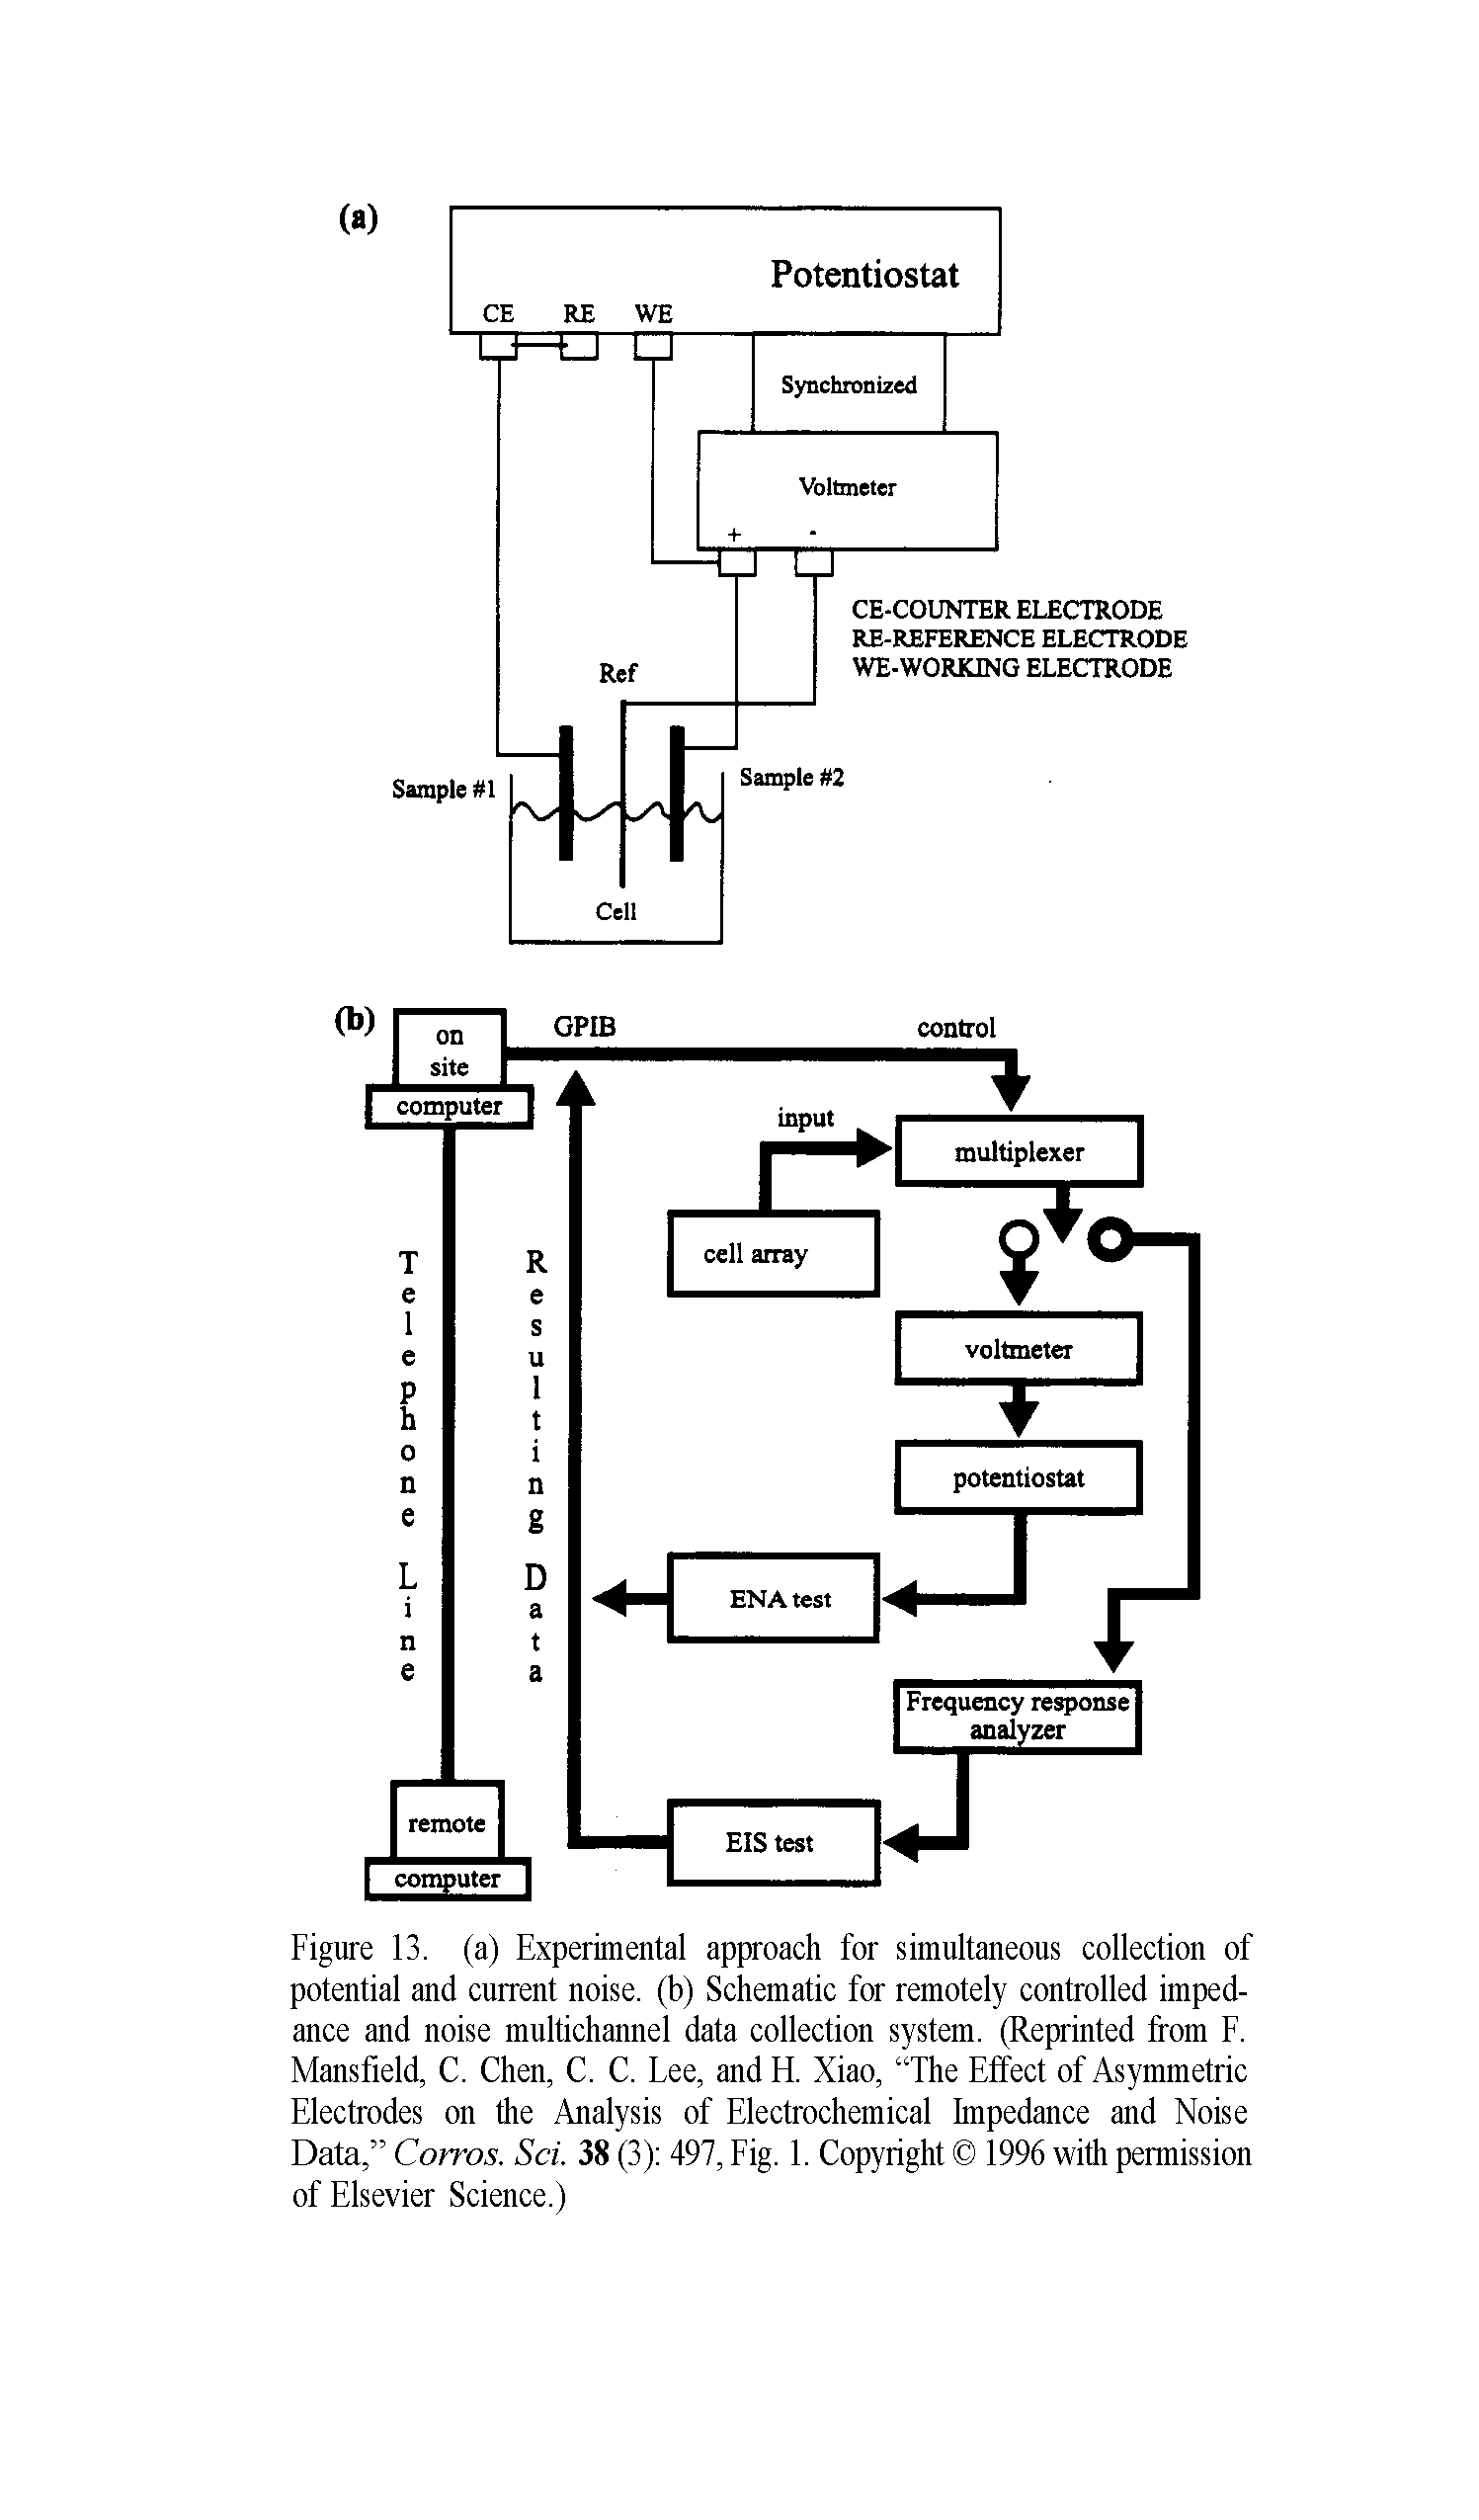 Figure 13. (a) Experimental approach for simultaneous collection of potential and current noise, (b) Schematic for remotely controlled impedance and noise multichannel data collection system. (Reprinted from F. Mansfield, C. Chen, C. C. Lee, and H. Xiao, The Effect of Asymmetric Electrodes on the Analysis of Electrochemical Impedance and Noise Data, Corros. Sci. 38 (3) 497, Fig. 1. Copyright 1996 with permission of Elsevier Science.)...